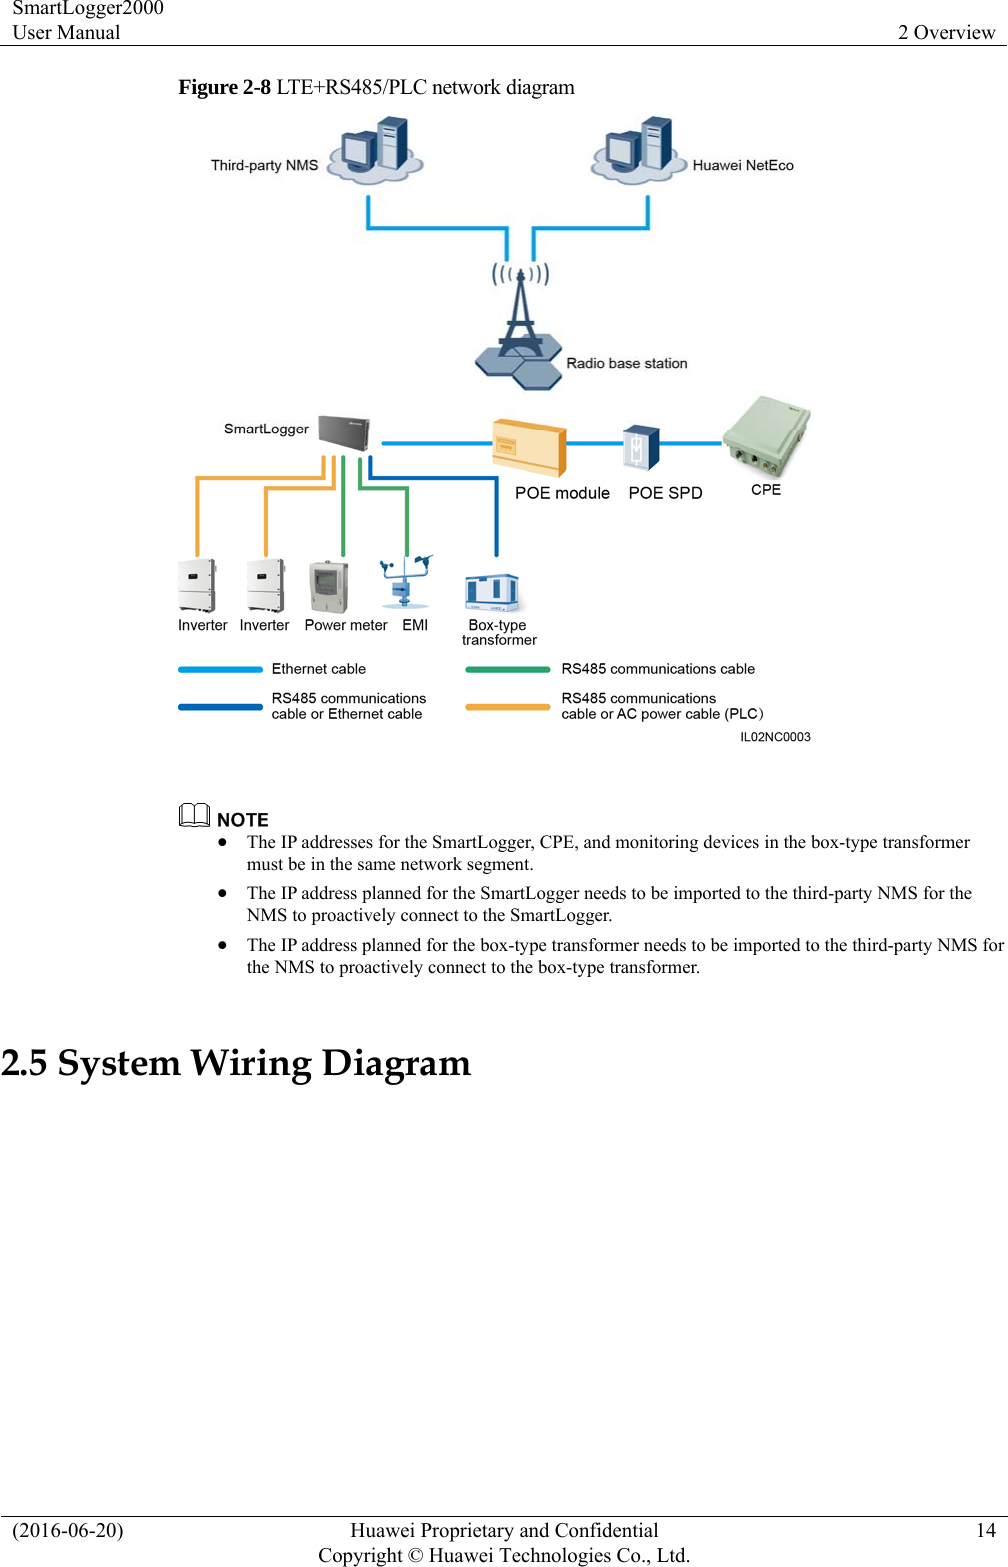 SmartLogger2000 User Manual  2 Overview (2016-06-20)  Huawei Proprietary and Confidential         Copyright © Huawei Technologies Co., Ltd.14 Figure 2-8 LTE+RS485/PLC network diagram     The IP addresses for the SmartLogger, CPE, and monitoring devices in the box-type transformer must be in the same network segment.  The IP address planned for the SmartLogger needs to be imported to the third-party NMS for the NMS to proactively connect to the SmartLogger.  The IP address planned for the box-type transformer needs to be imported to the third-party NMS for the NMS to proactively connect to the box-type transformer. 2.5 System Wiring Diagram  